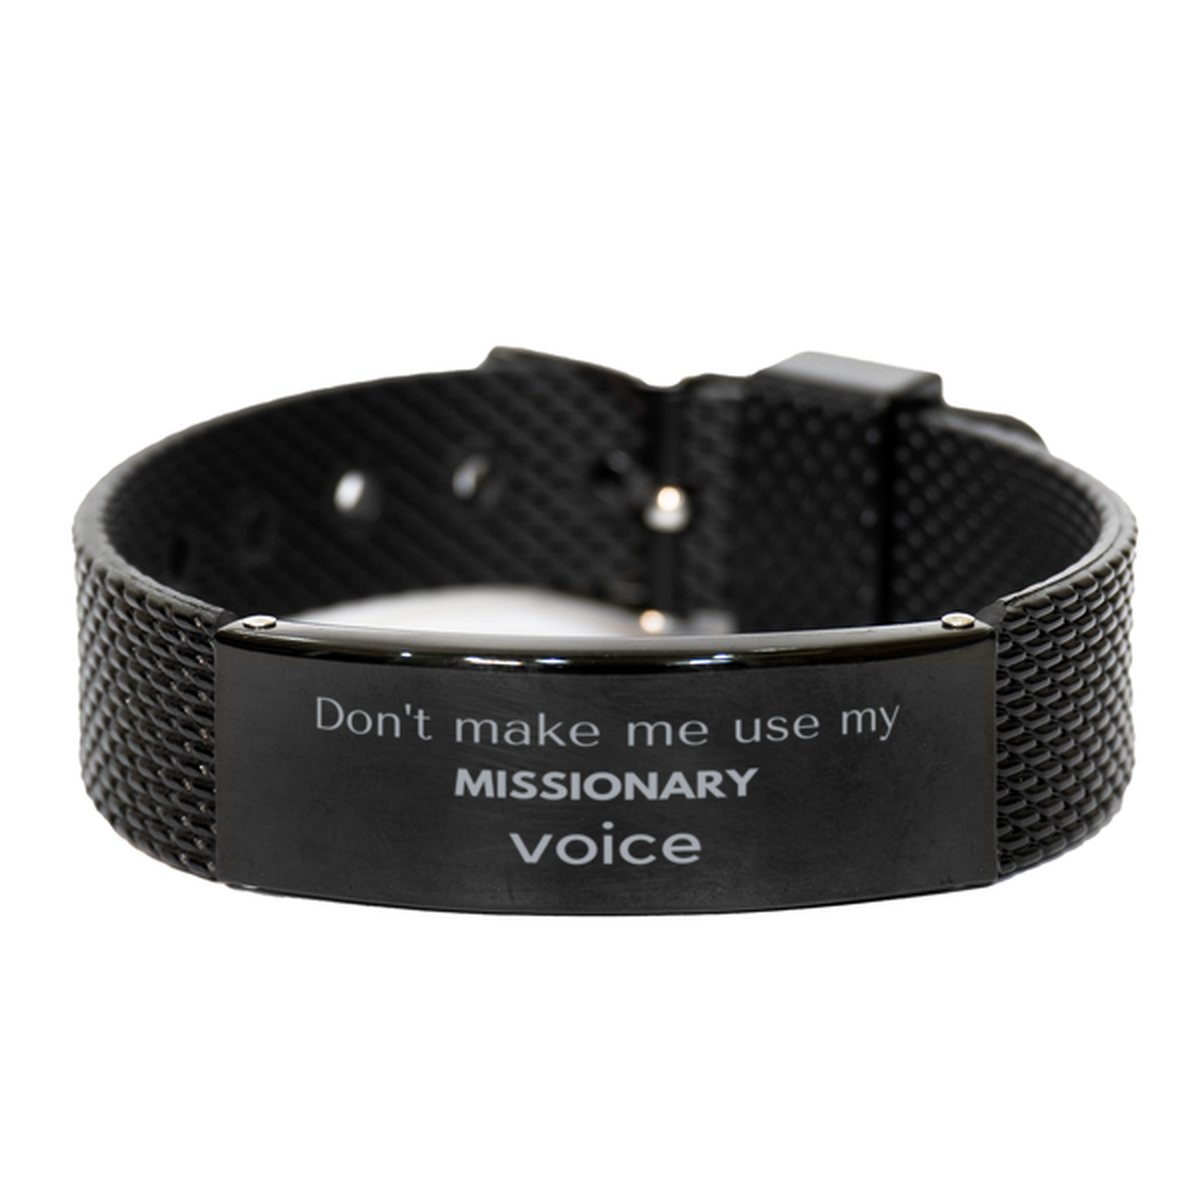 Don't make me use my Missionary voice, Sarcasm Missionary Gifts, Christmas Missionary Black Shark Mesh Bracelet Birthday Unique Gifts For Missionary Coworkers, Men, Women, Colleague, Friends